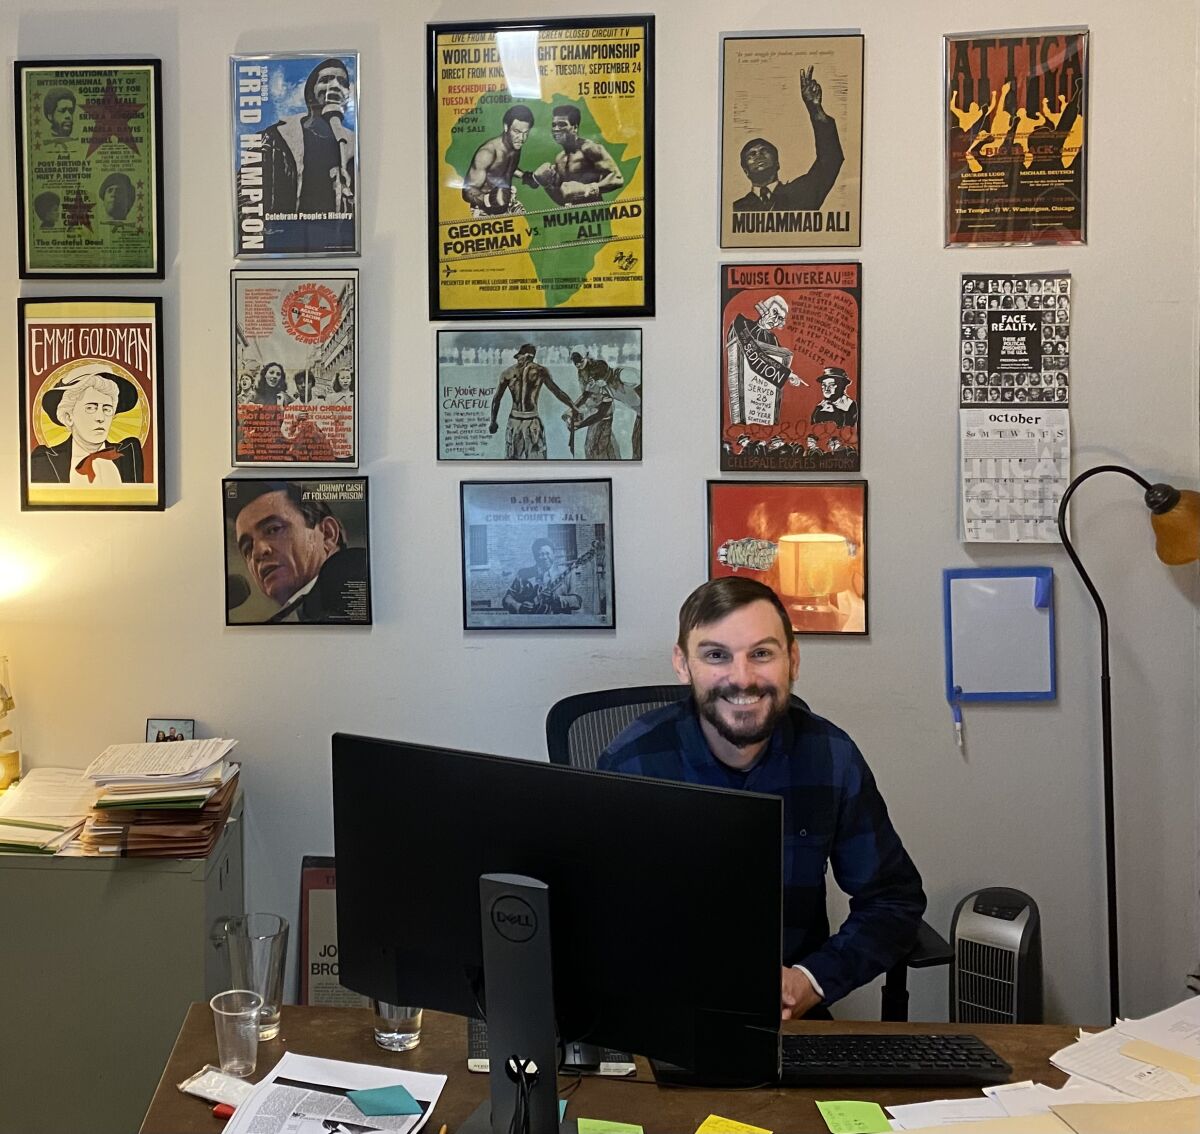 Brad Thomson sitting behind a desk in an office decorated with posters of pop culture and political heroes.